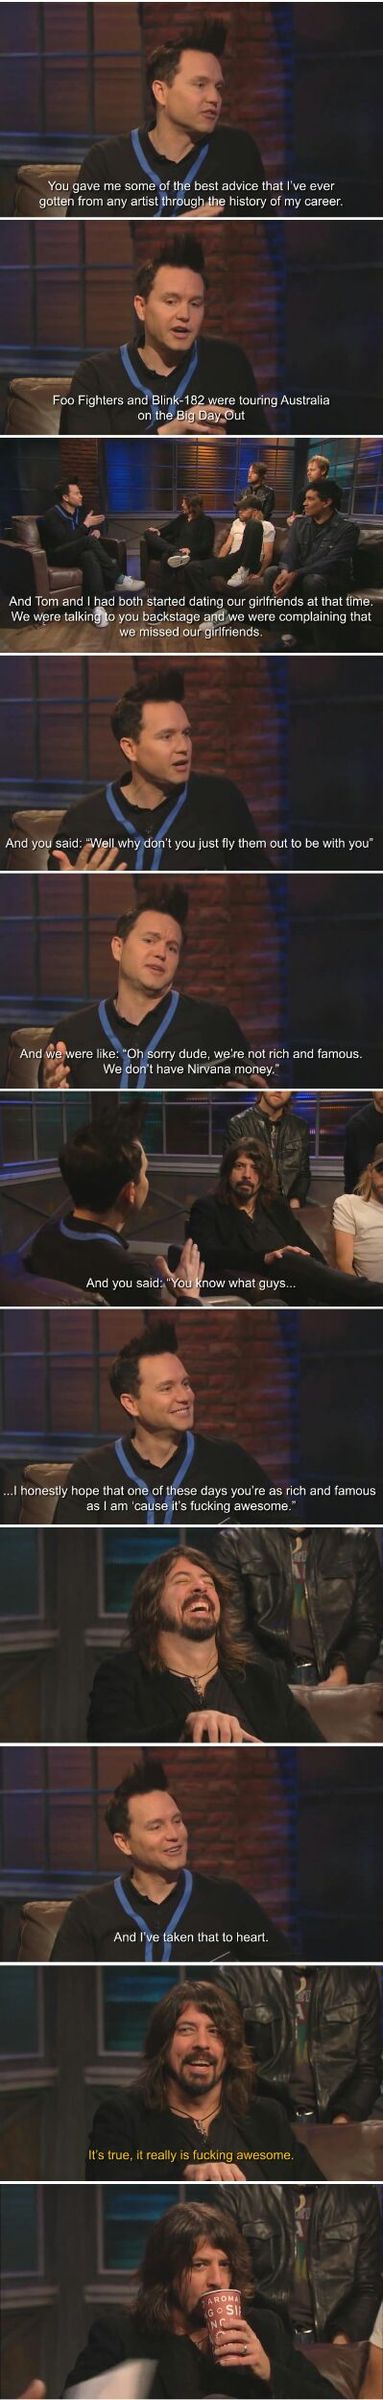 Dave Grohl - meme